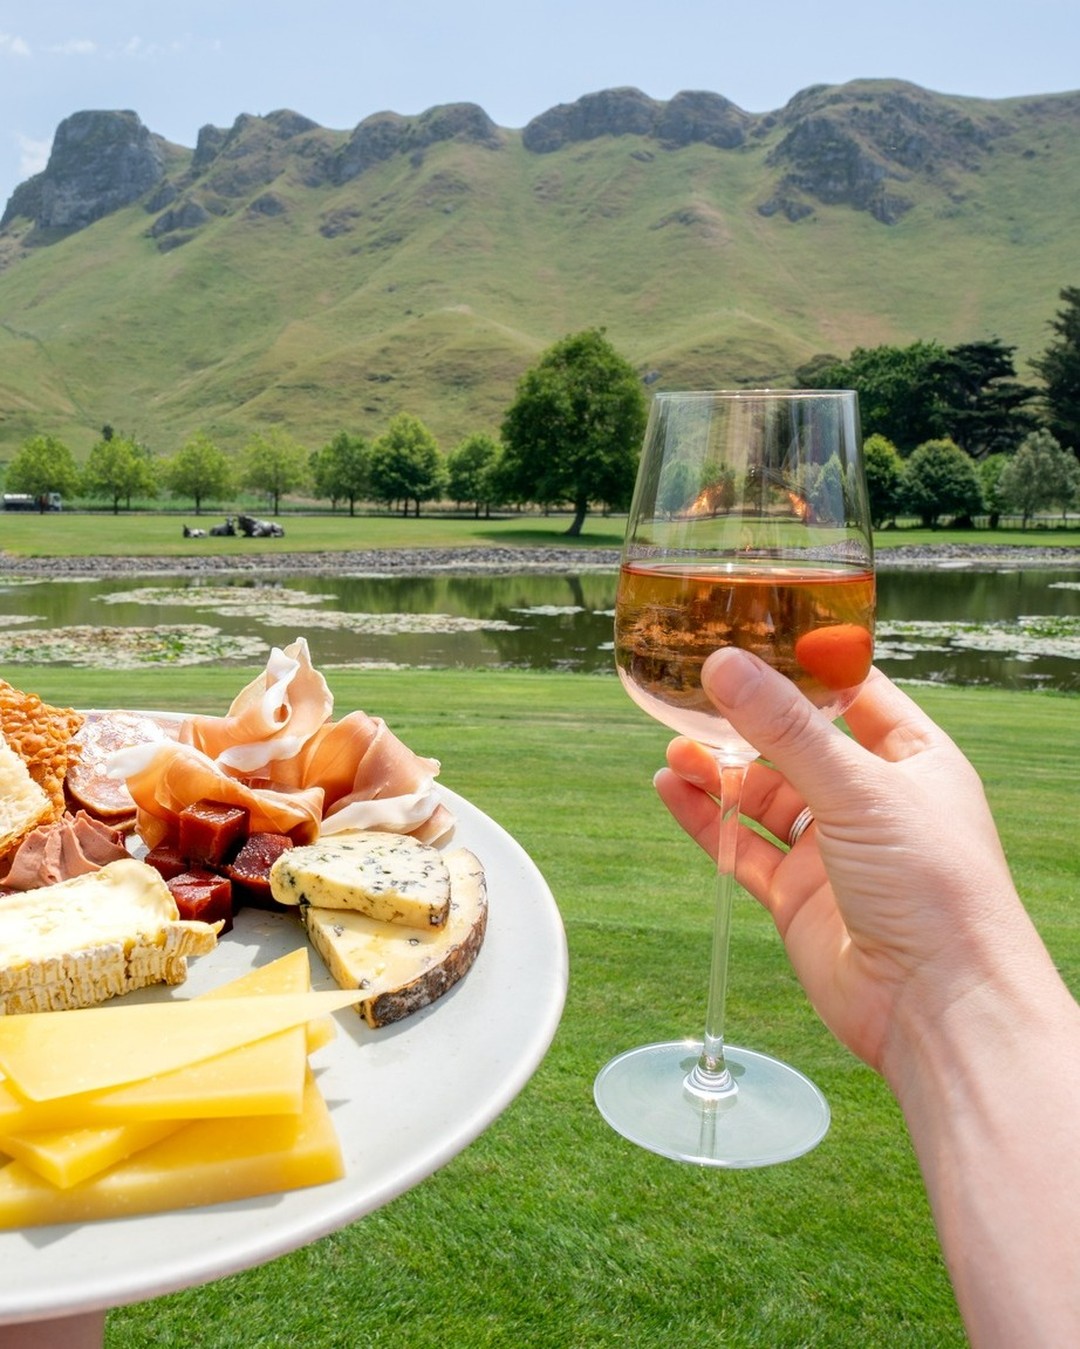 .
So, apparently, it is International Wine & Cheese Day.. 
Who knew! Well, everyone now!!
.
Except it is a Monday. 
Is Monday a drink wine & eat 
cheese day?
Do you save it for, at least Thursday?
Or do you follow the wine & cheese rules and indulge on the right day?
.
Decisions! Decisions! 
.
#craggyrange #hawkesbay #nzwine #newzealandwine #nzcheese #foodandwine #maijourneysdrinks #maijourneyseats #boutiquewineries #craggyrangewines